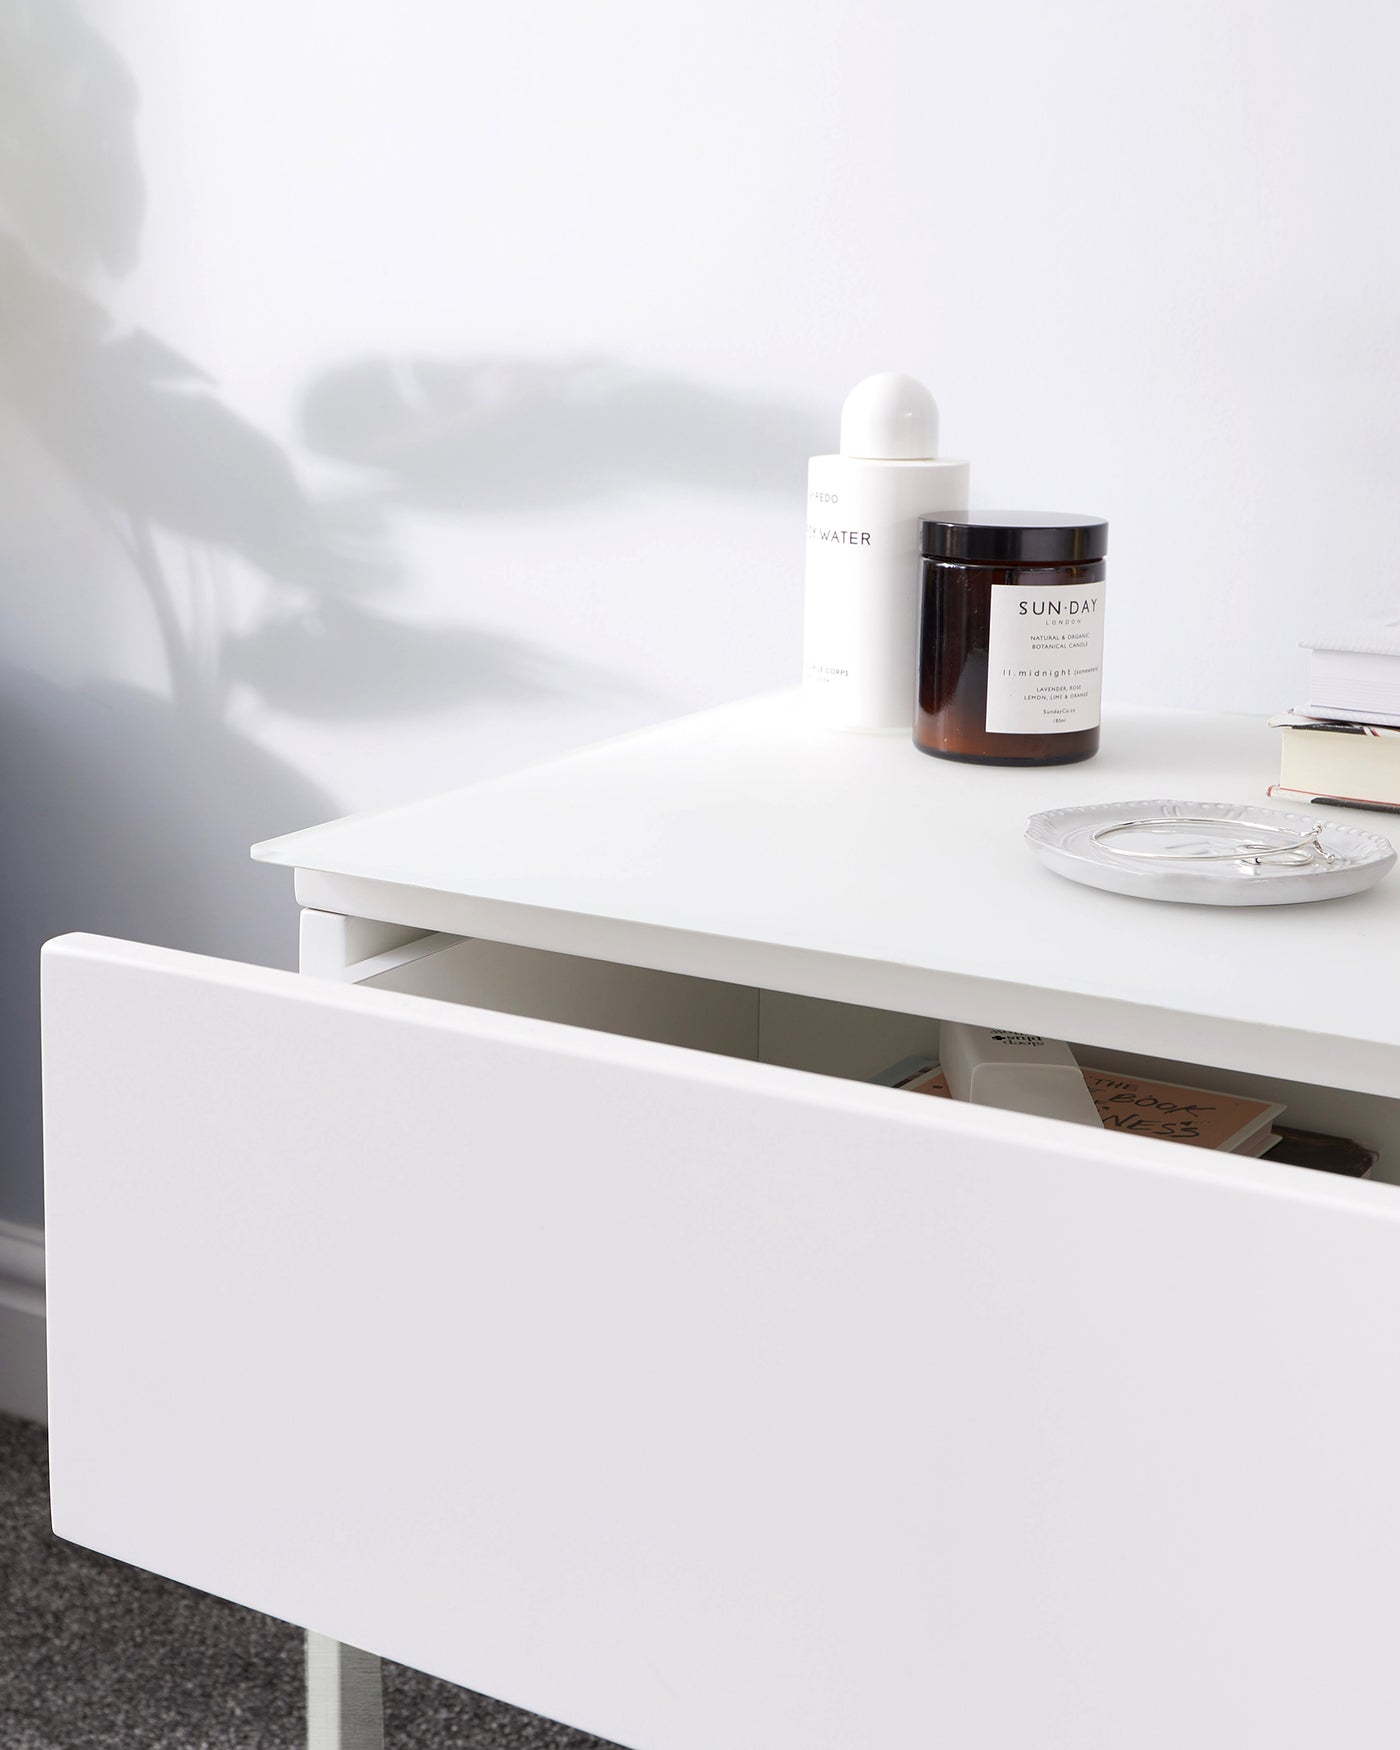 Modern minimalist white console table with clean lines and a smooth finish, featuring an open shelf with a partially opened drawer showing books and items inside. The tabletop is accessorized with a white cylindrical container, a brown glass jar, and stacked books next to a small decorative plate.